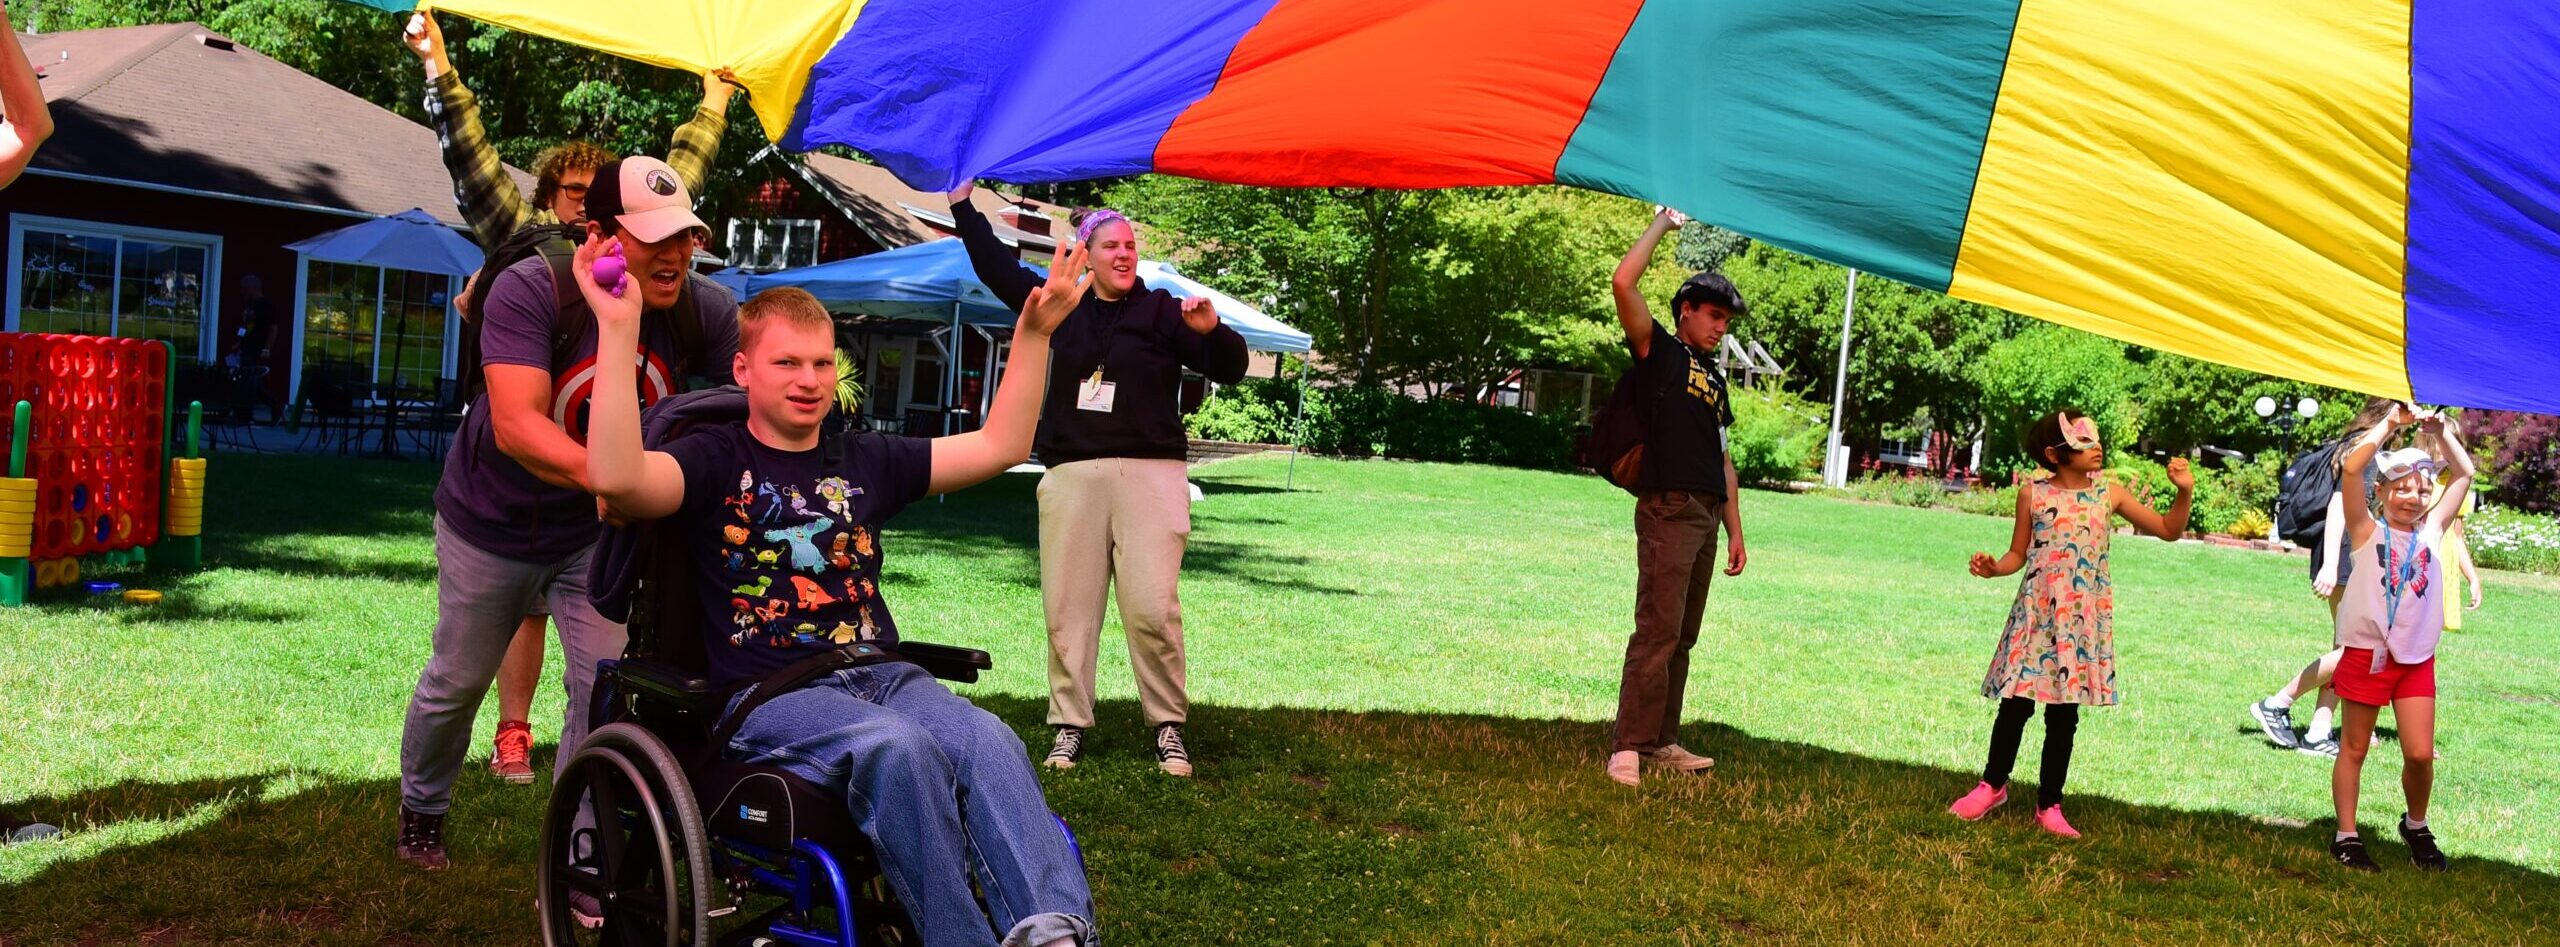 A young man in a wheelchair is being pushed under a large billowing parachute. His arms are raised and has a huge smile on his face.